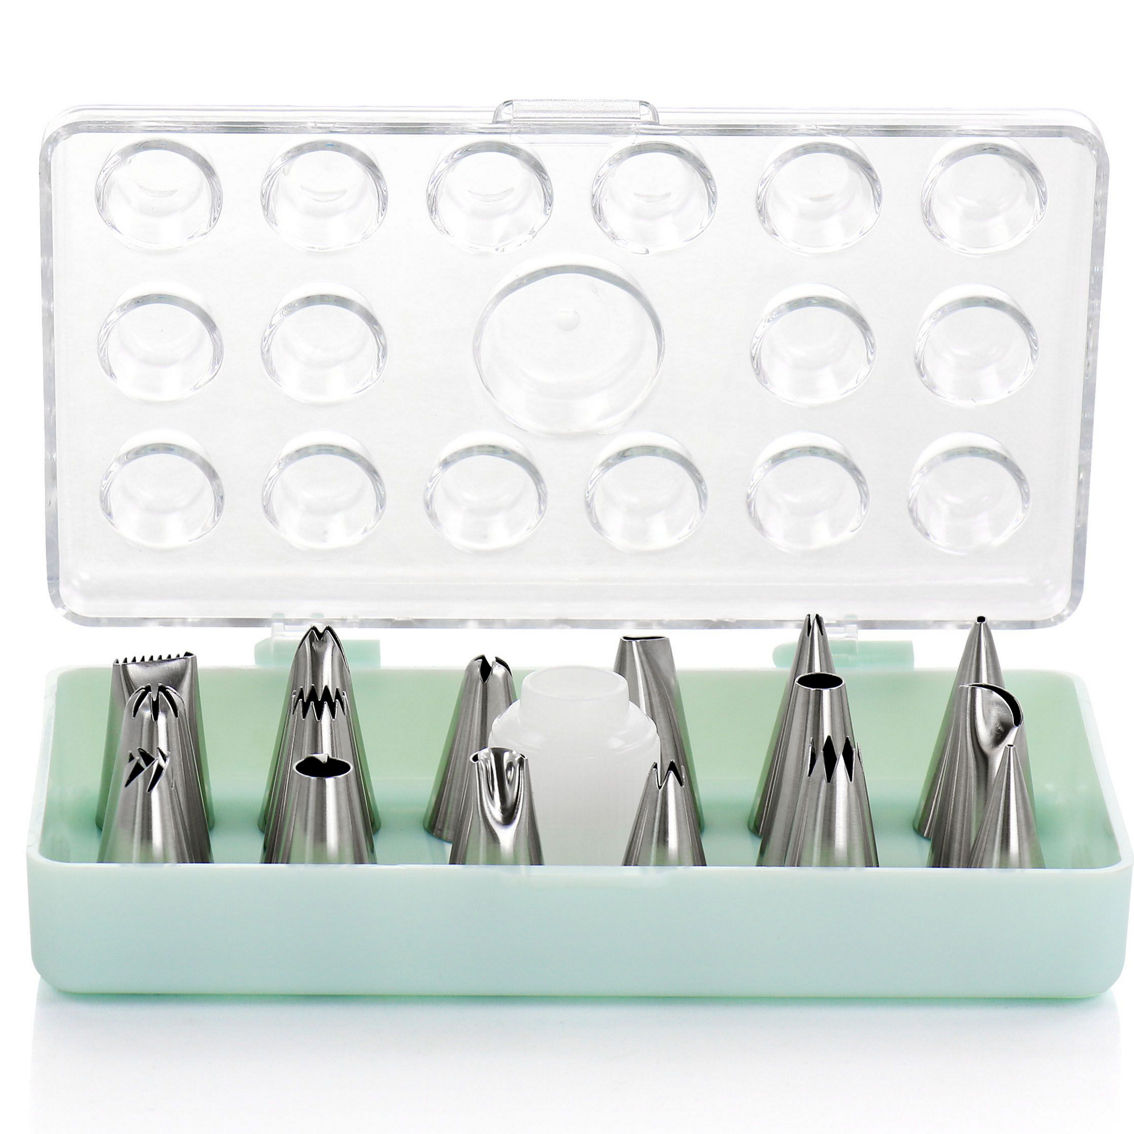 Martha Stewart 16 Piece Stainless Steel Assorted Cake Decorating Nozzles - Image 2 of 5